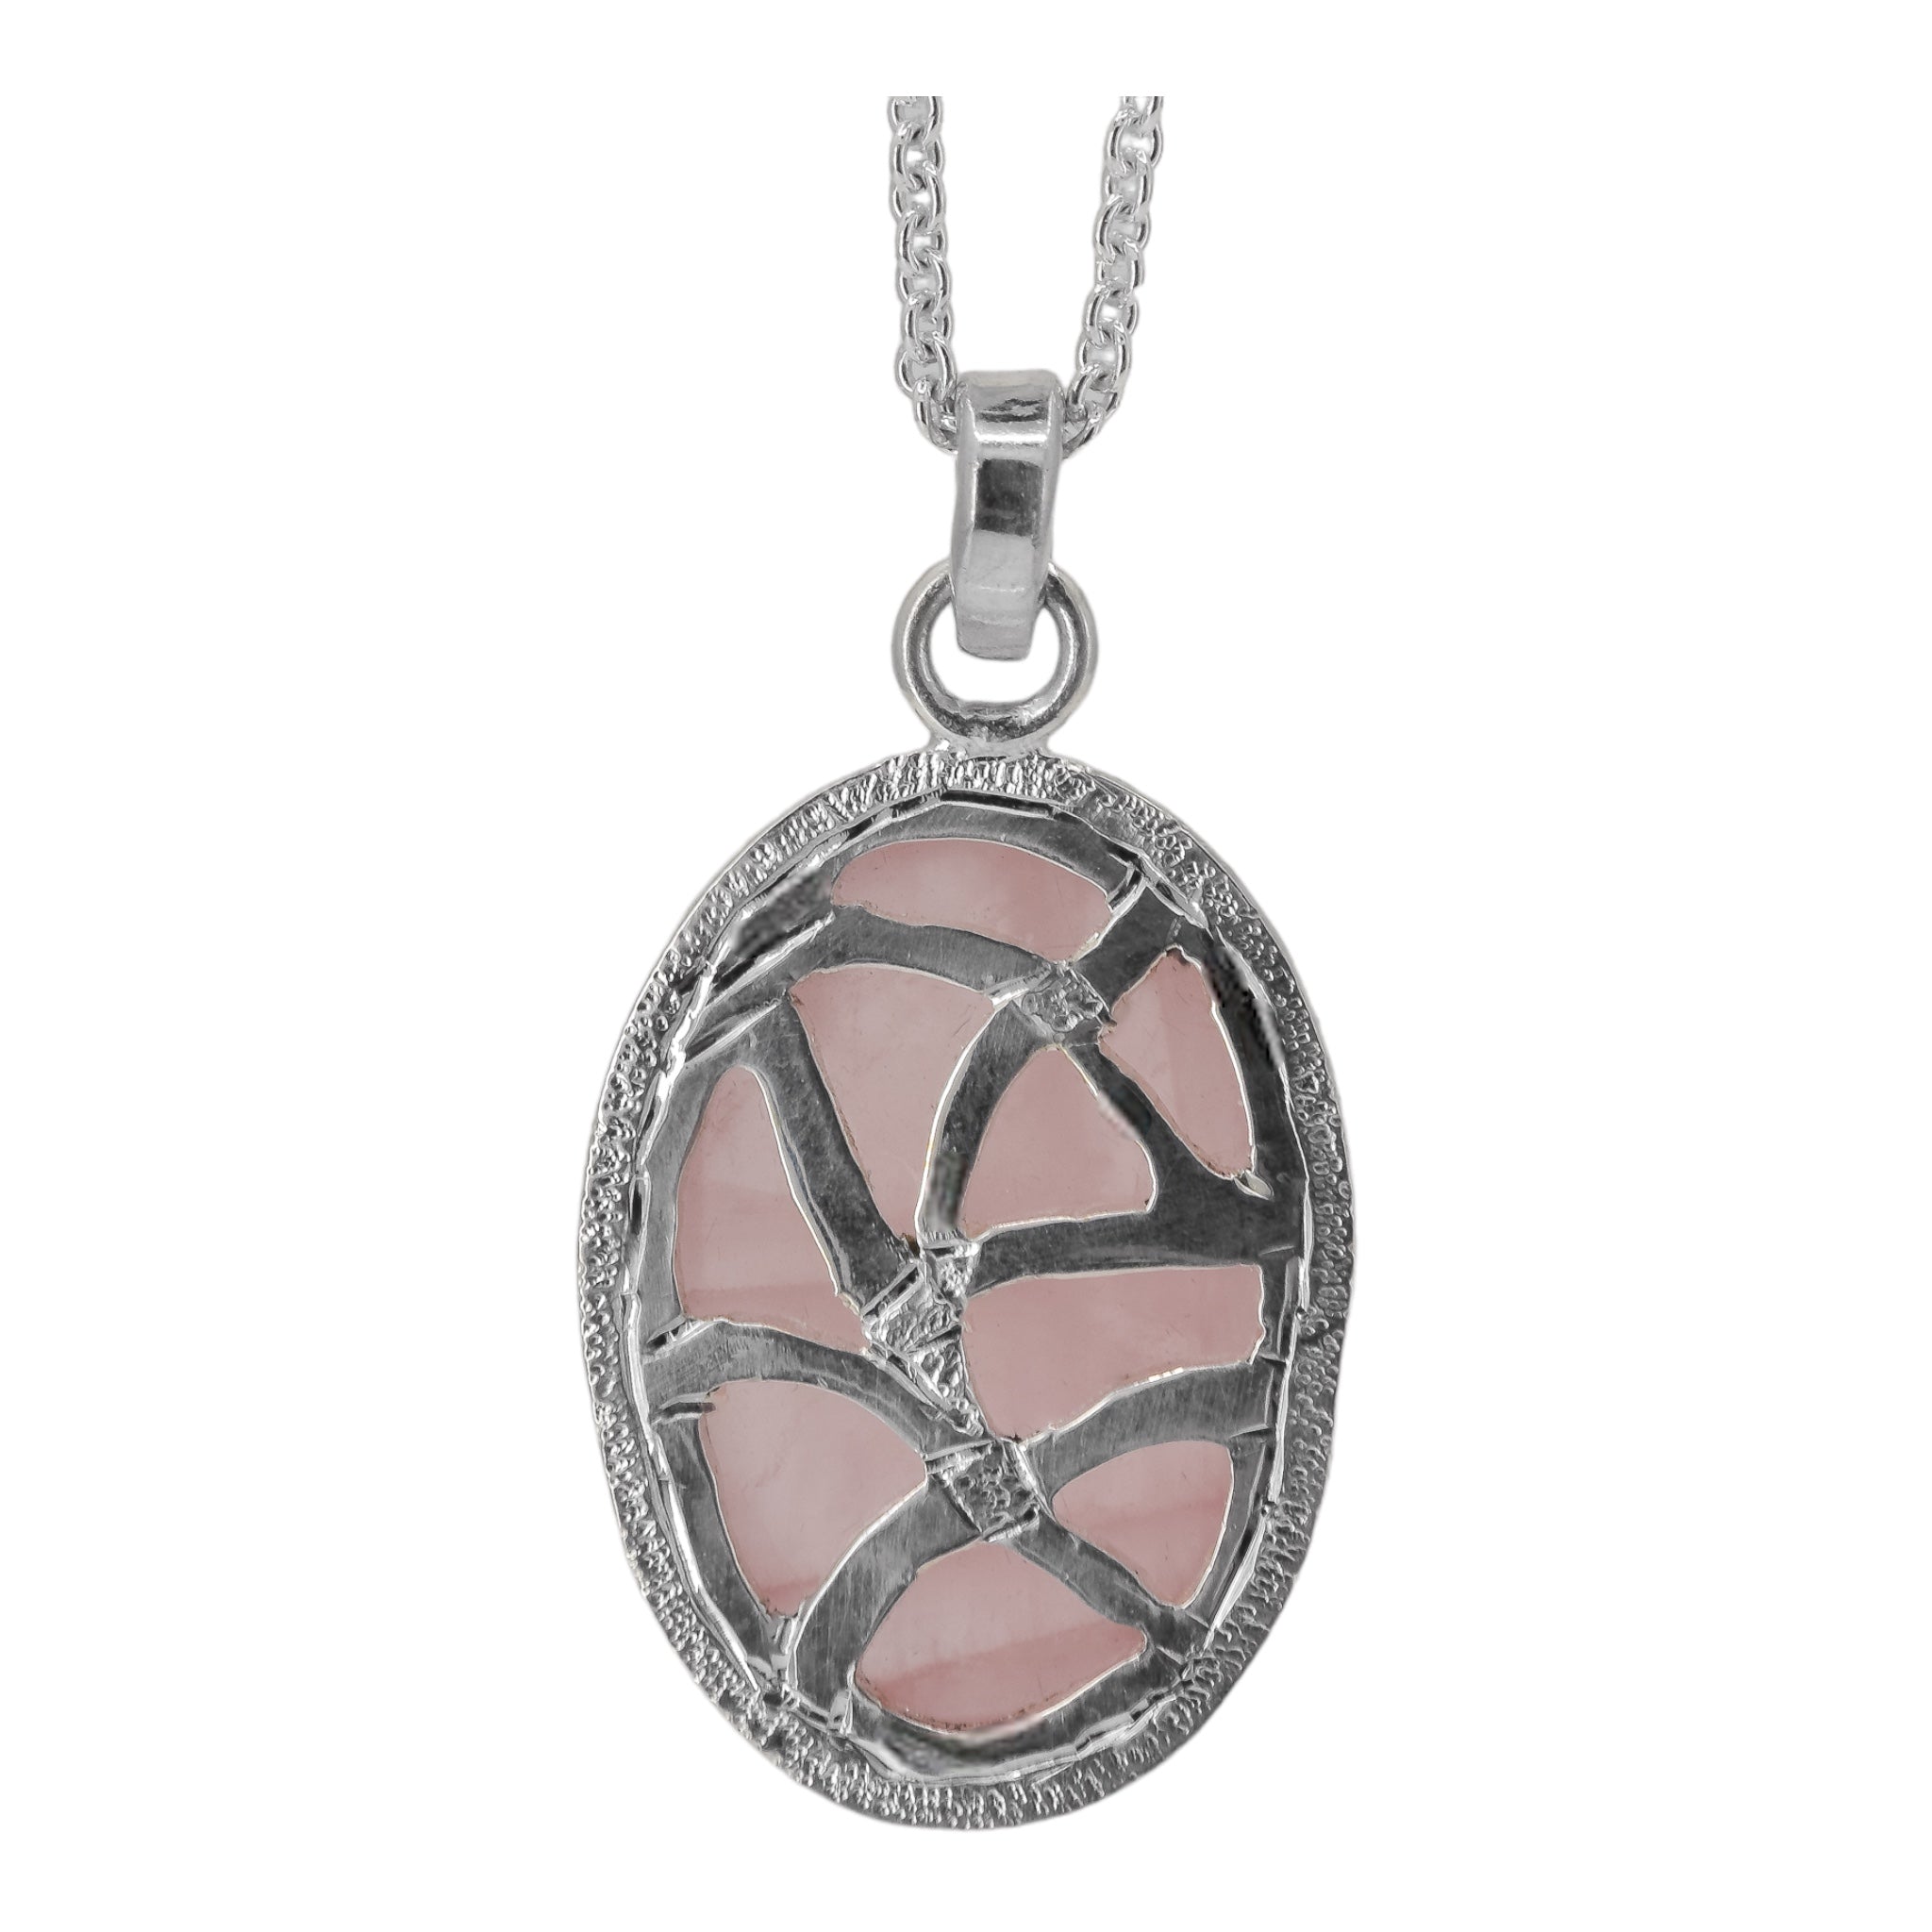 Back of an oval rose quartz pendant necklace in sterling silver, with a pierceed out random pattern and hand engraved lines.